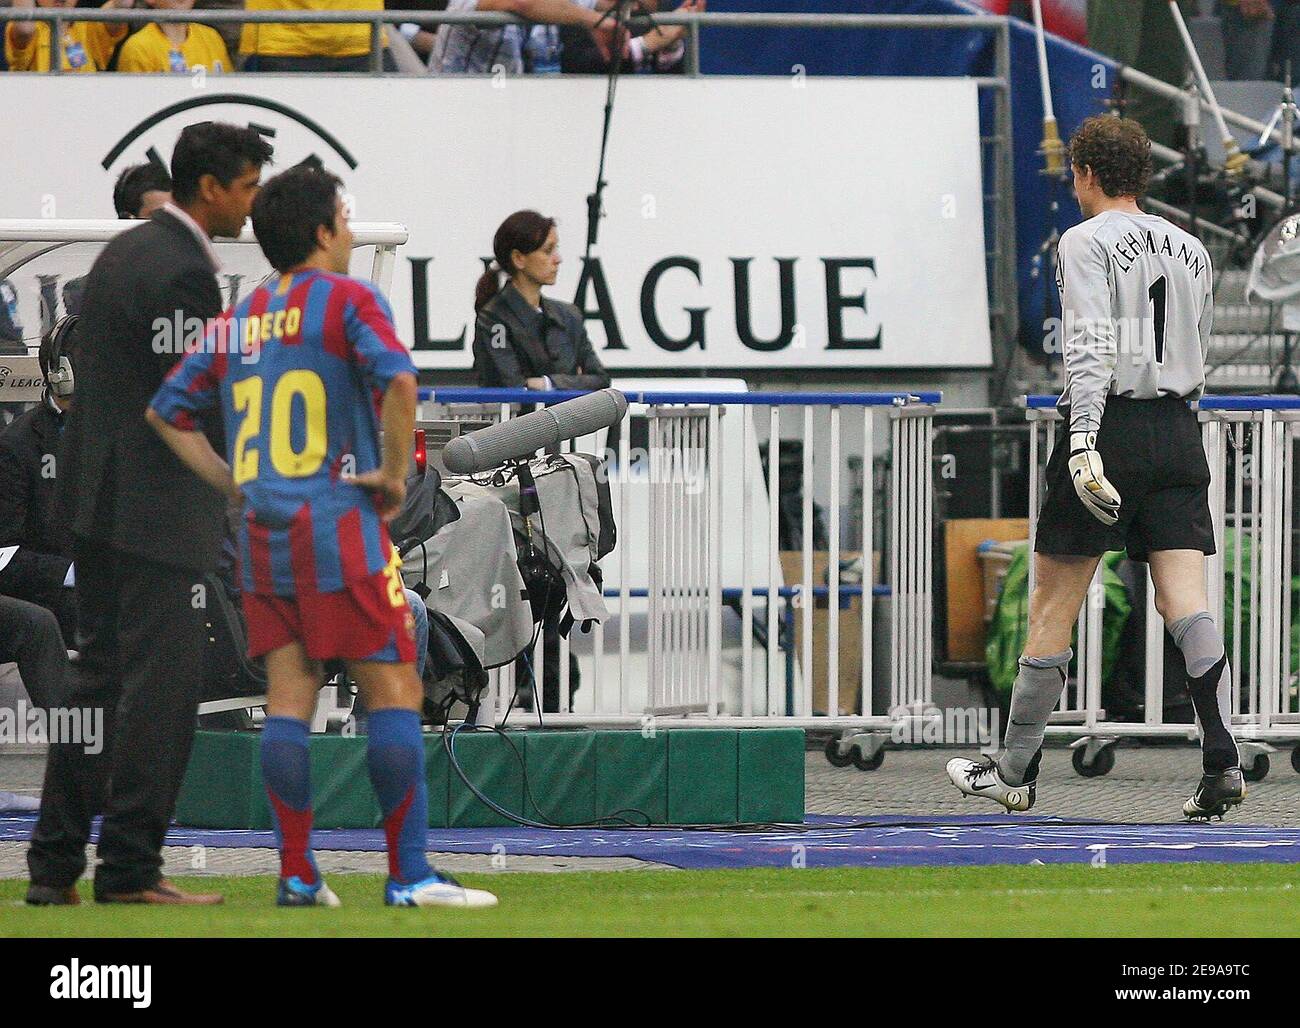 Arsenal's goalkeeper Jens Lehmann leaves the field dejected after his red card during the Champions League final, Barcelona vs Arsenal, at the Stade de France, in Saint Denis, near Paris, France, on May 17, 2006. Barcelona won 2-1. Photo by Christian Liewig/CAMELEON/ABACAPRESS.COM Stock Photo